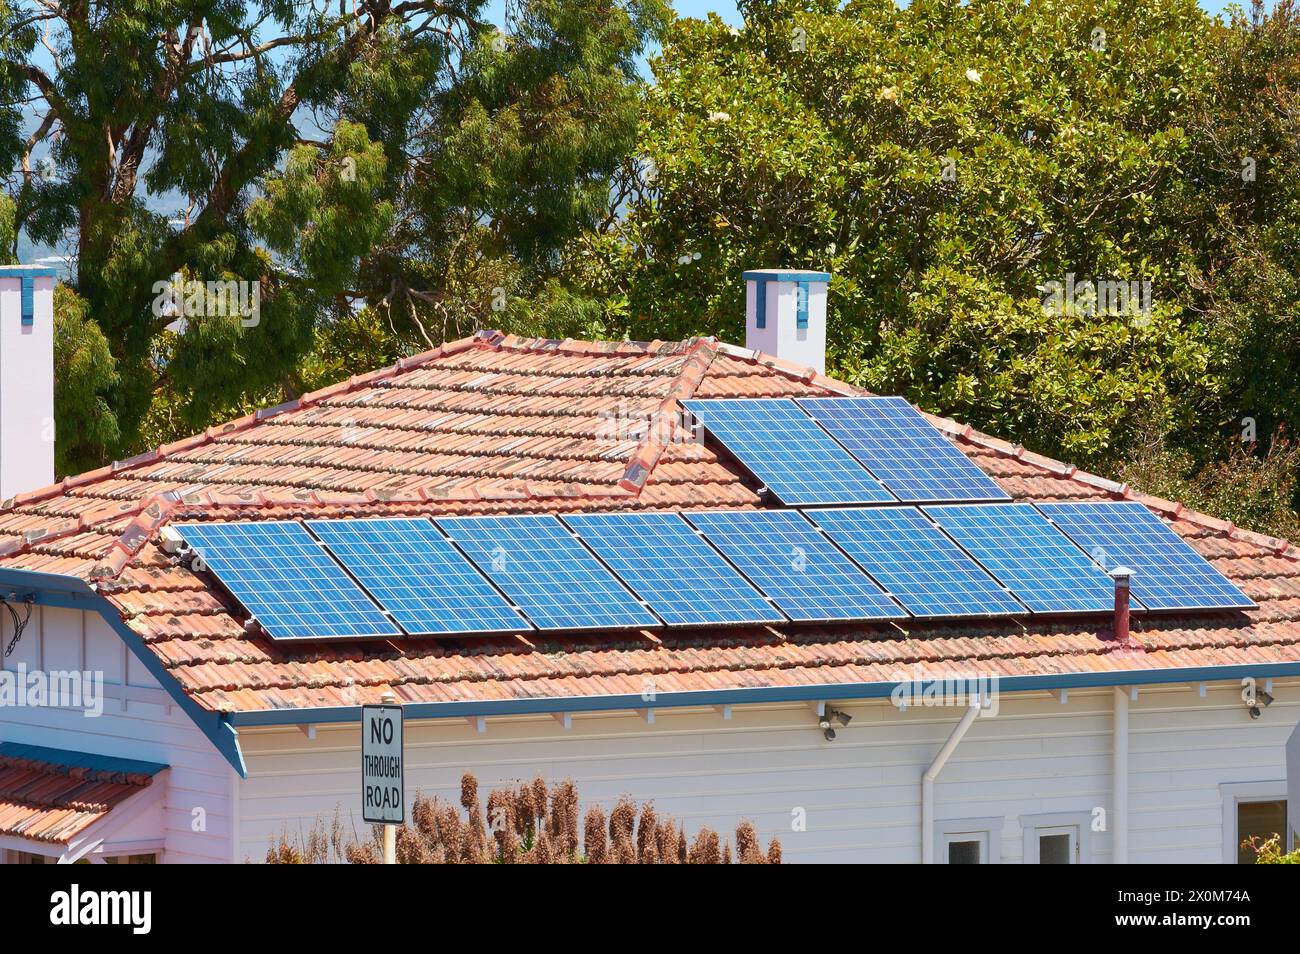 Solar panels on the tiled roof of an Australian residential home in the town of Albany, Western Australia. Stock Photo